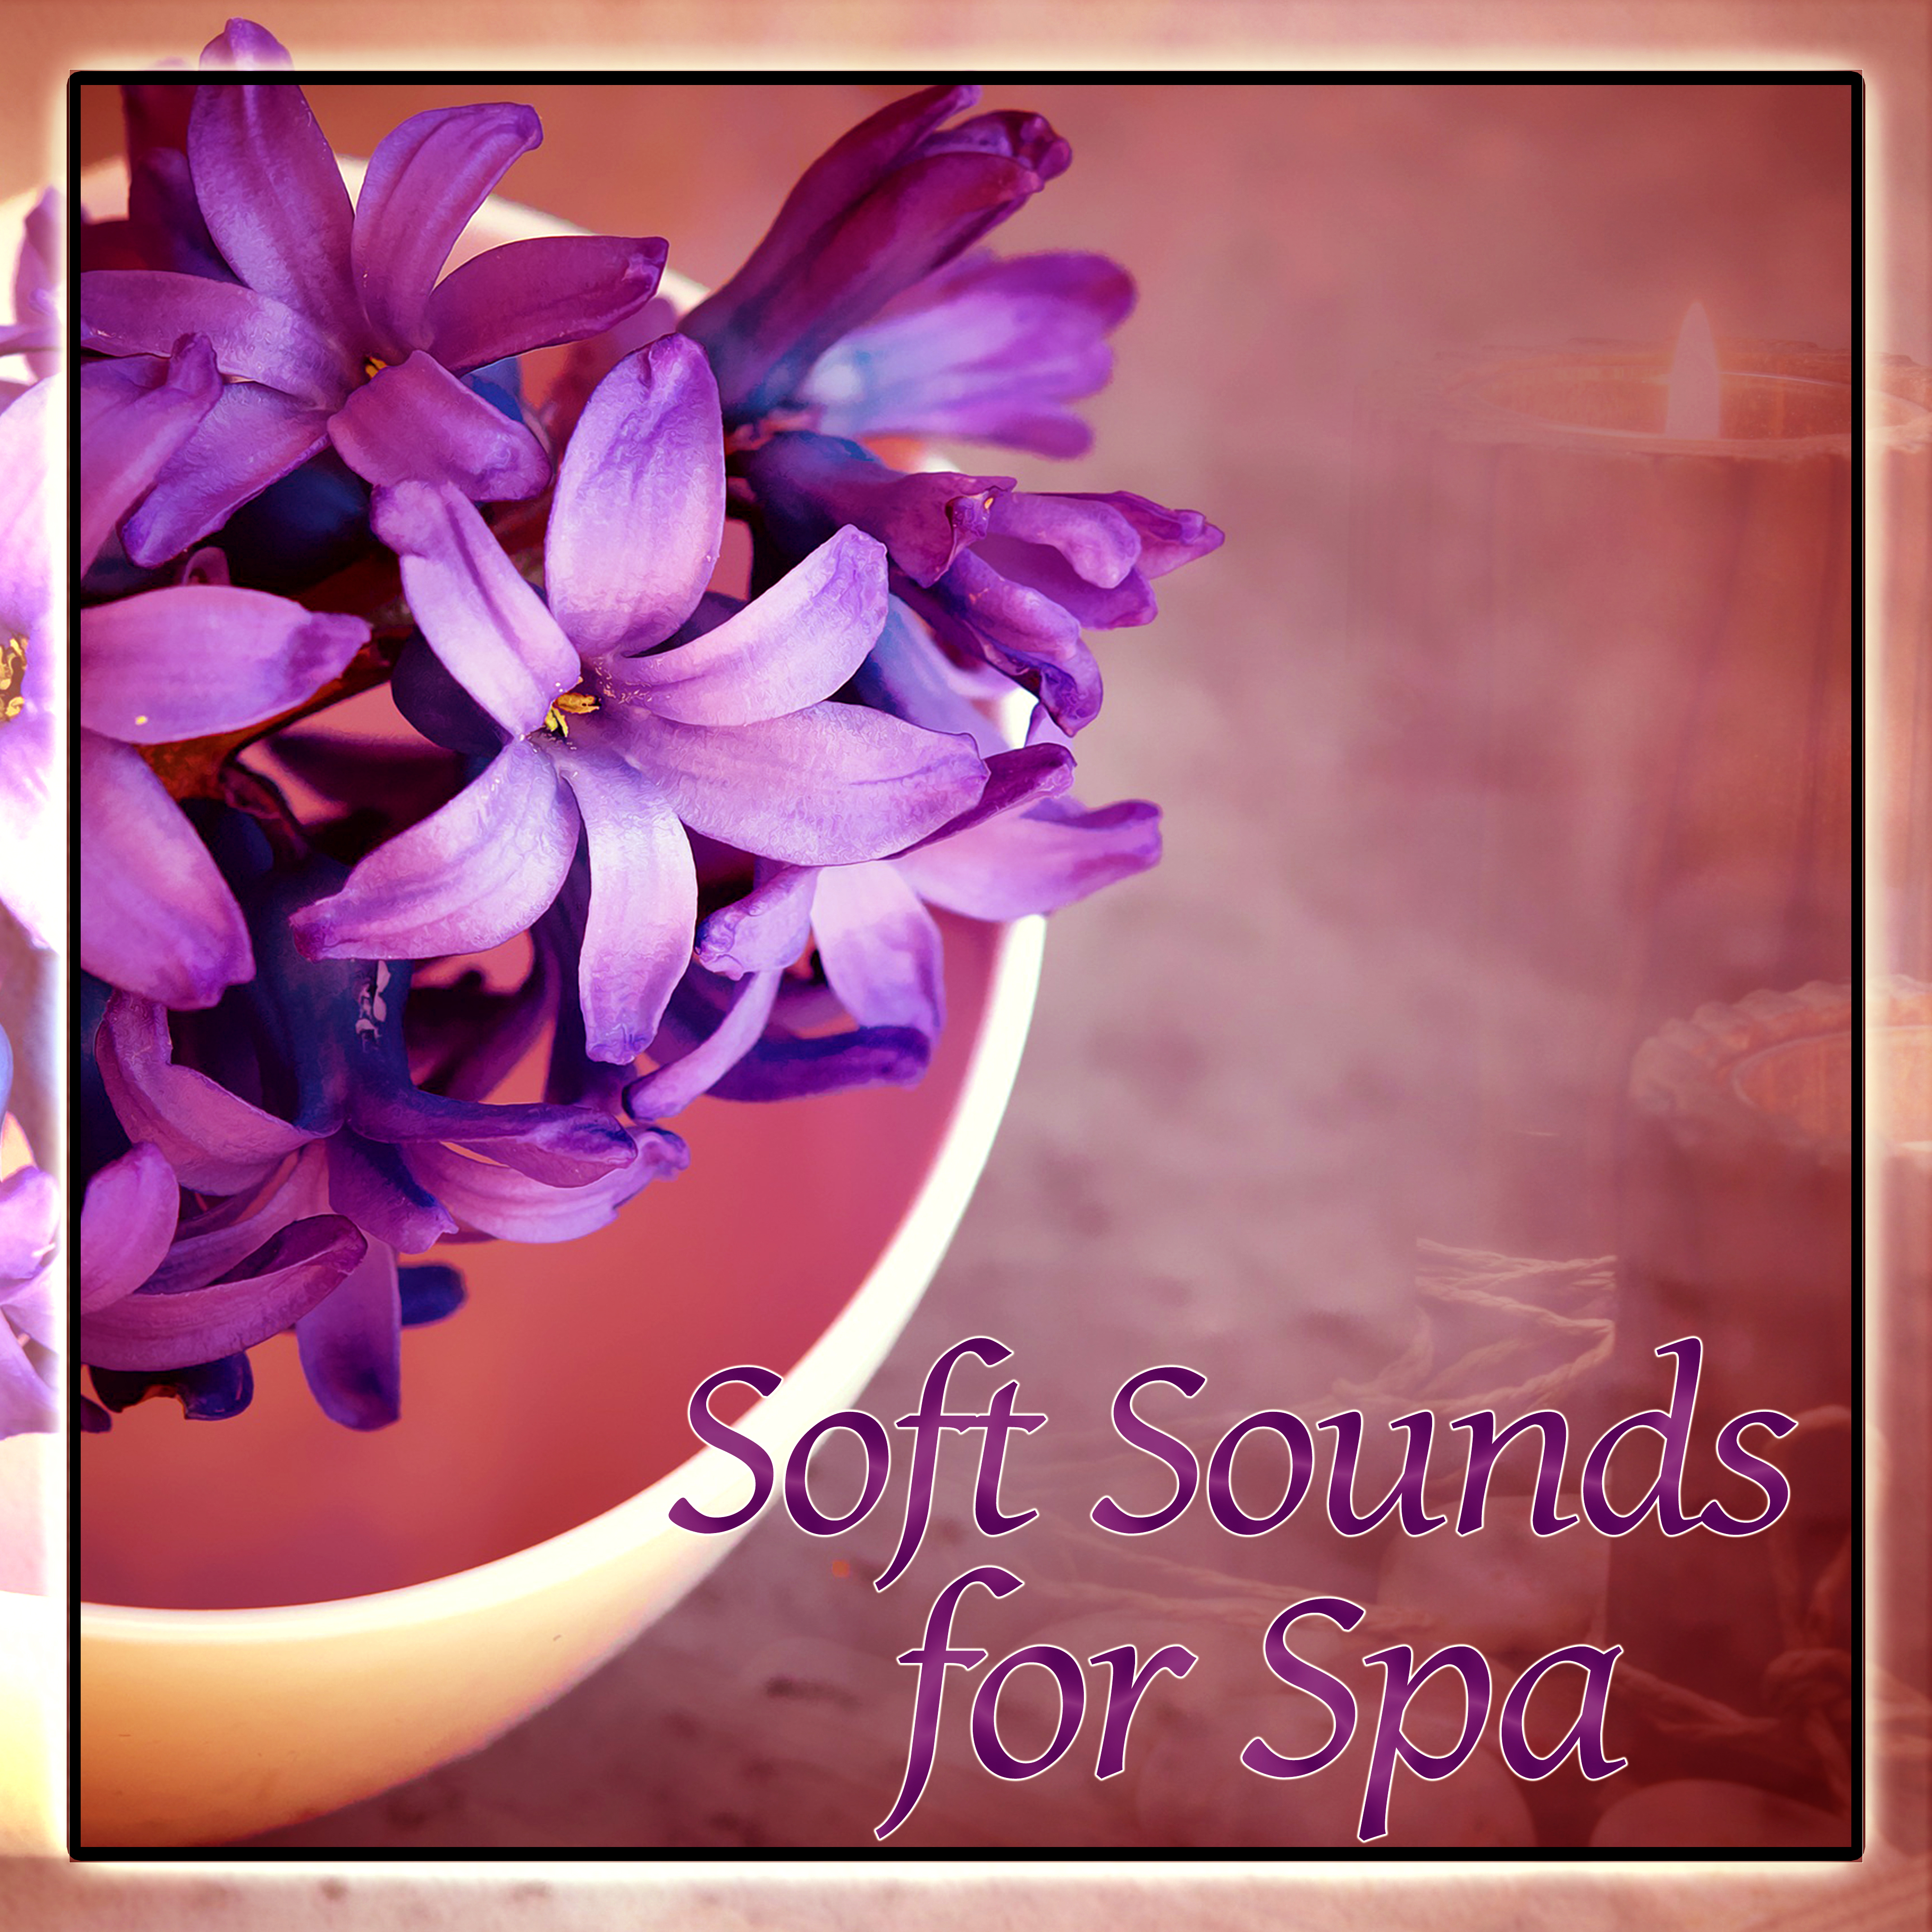 Soft Sounds for Spa – Music Full of Nature Sounds, Calmn Music for Background to SPA & Wellness, Yoga Meditation, Inner Peace, Deep Relaxing Music